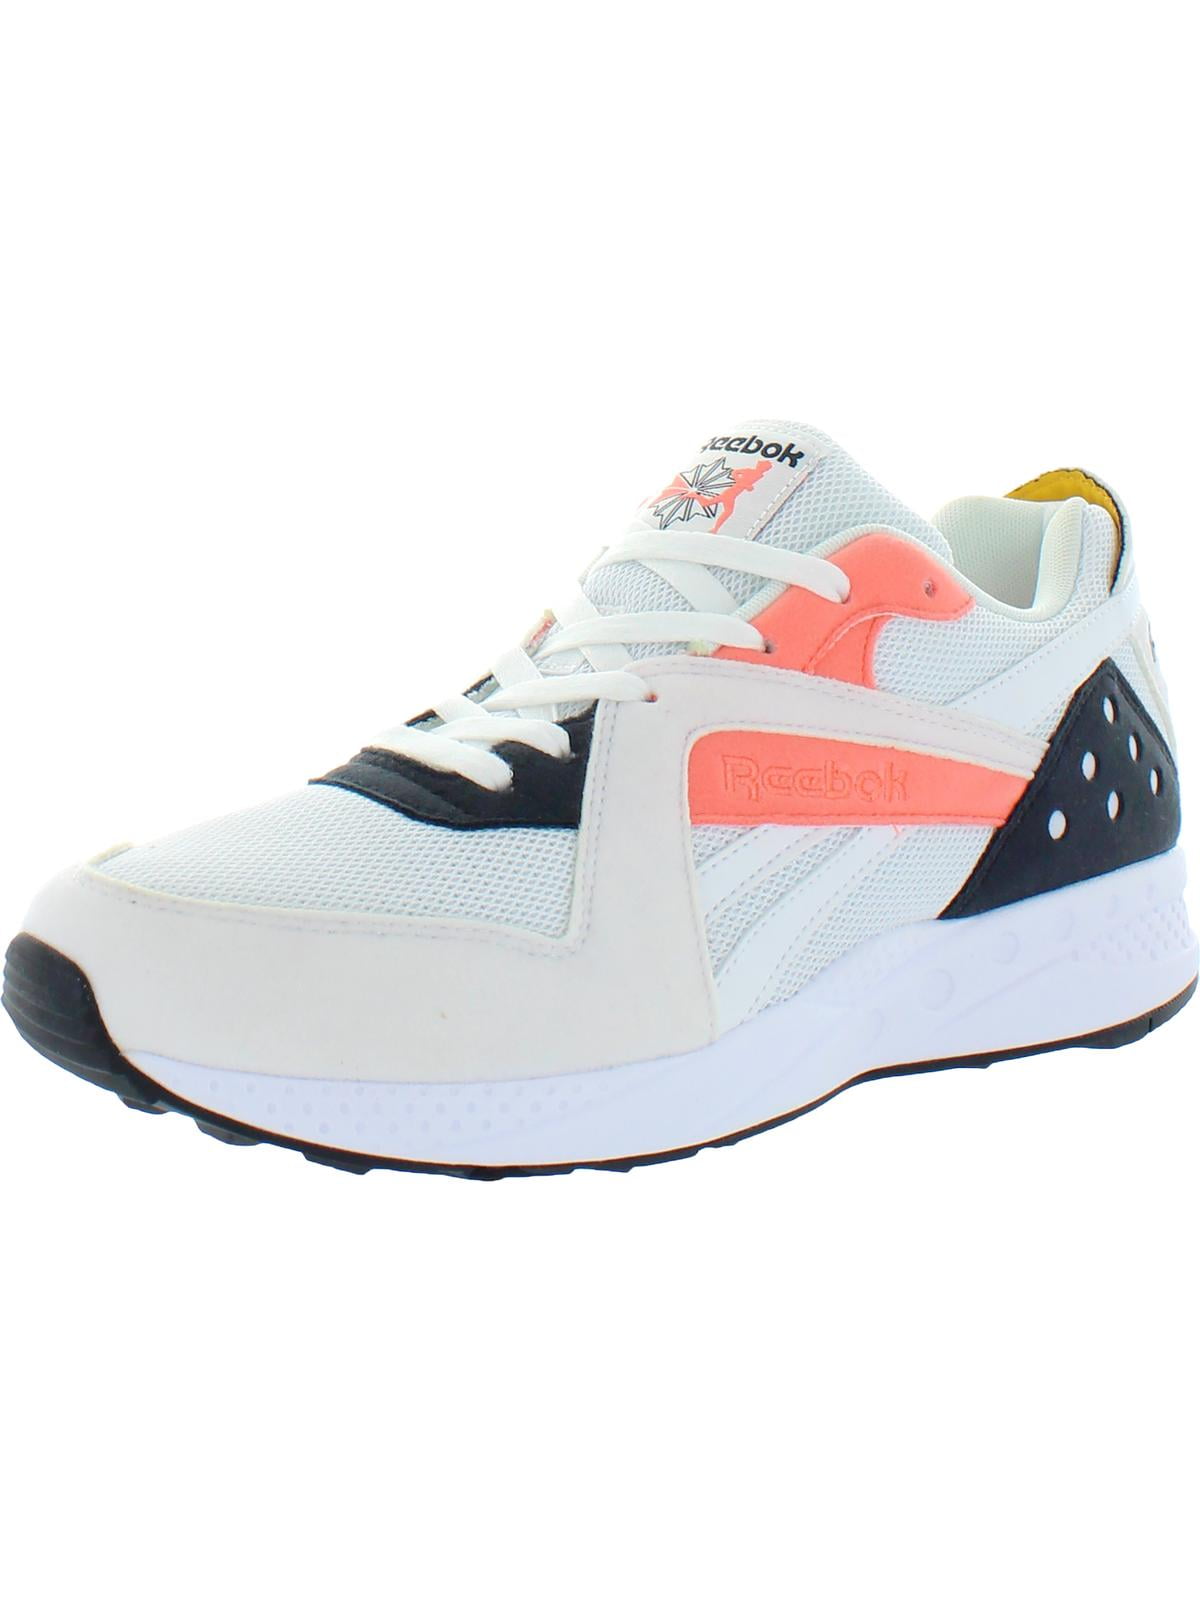 track running shoes mens